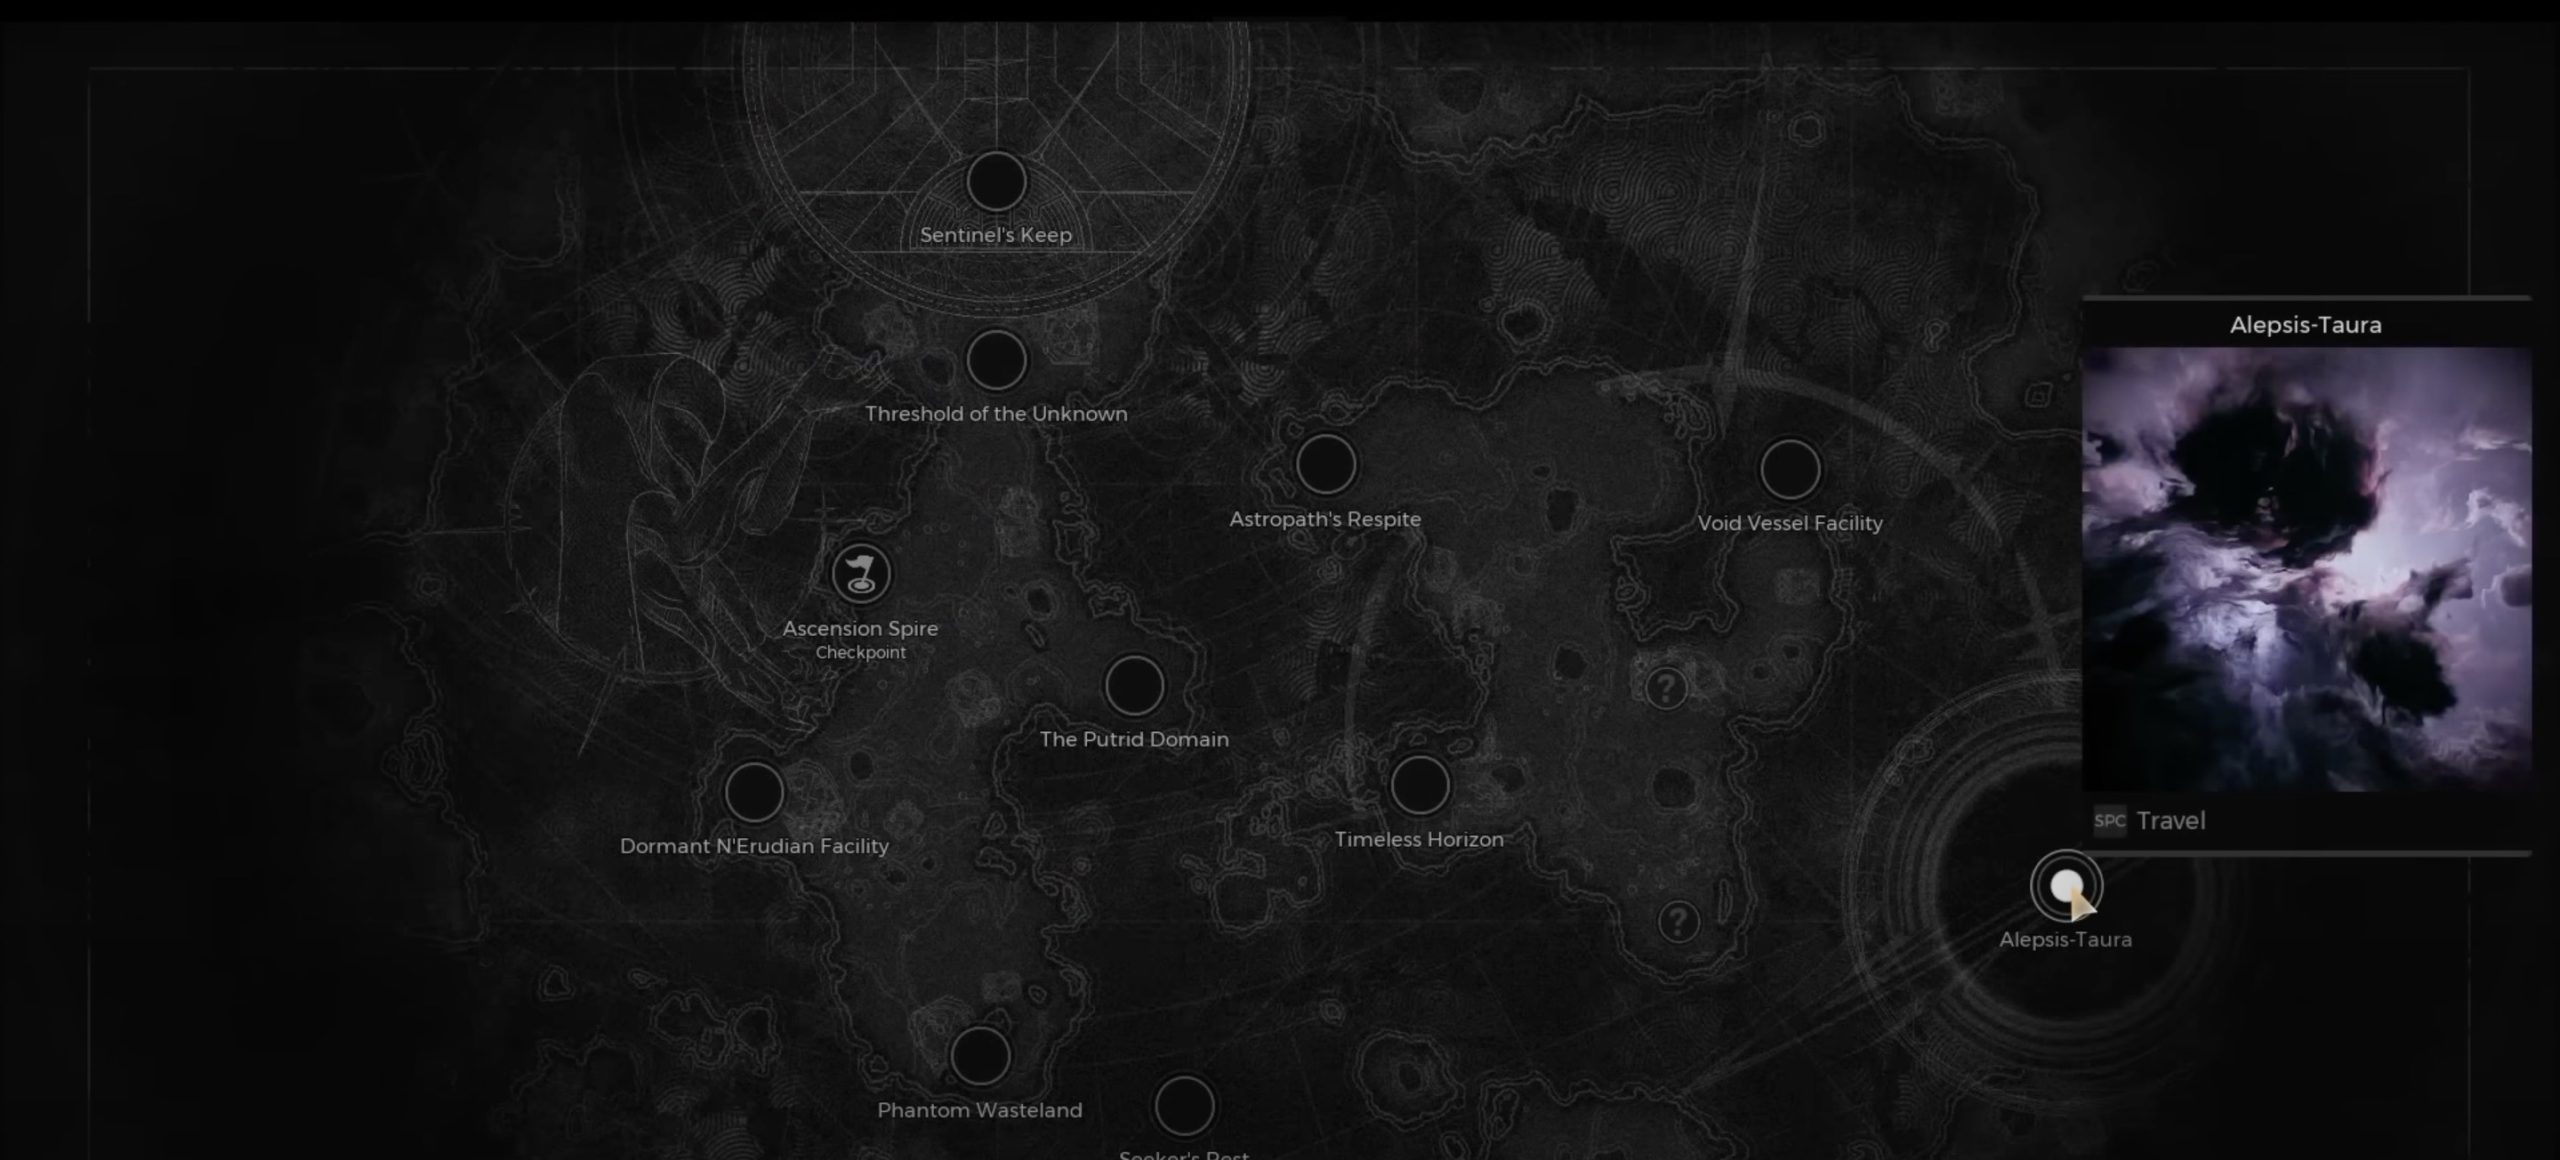 Alepsis-Taura on the in-game map